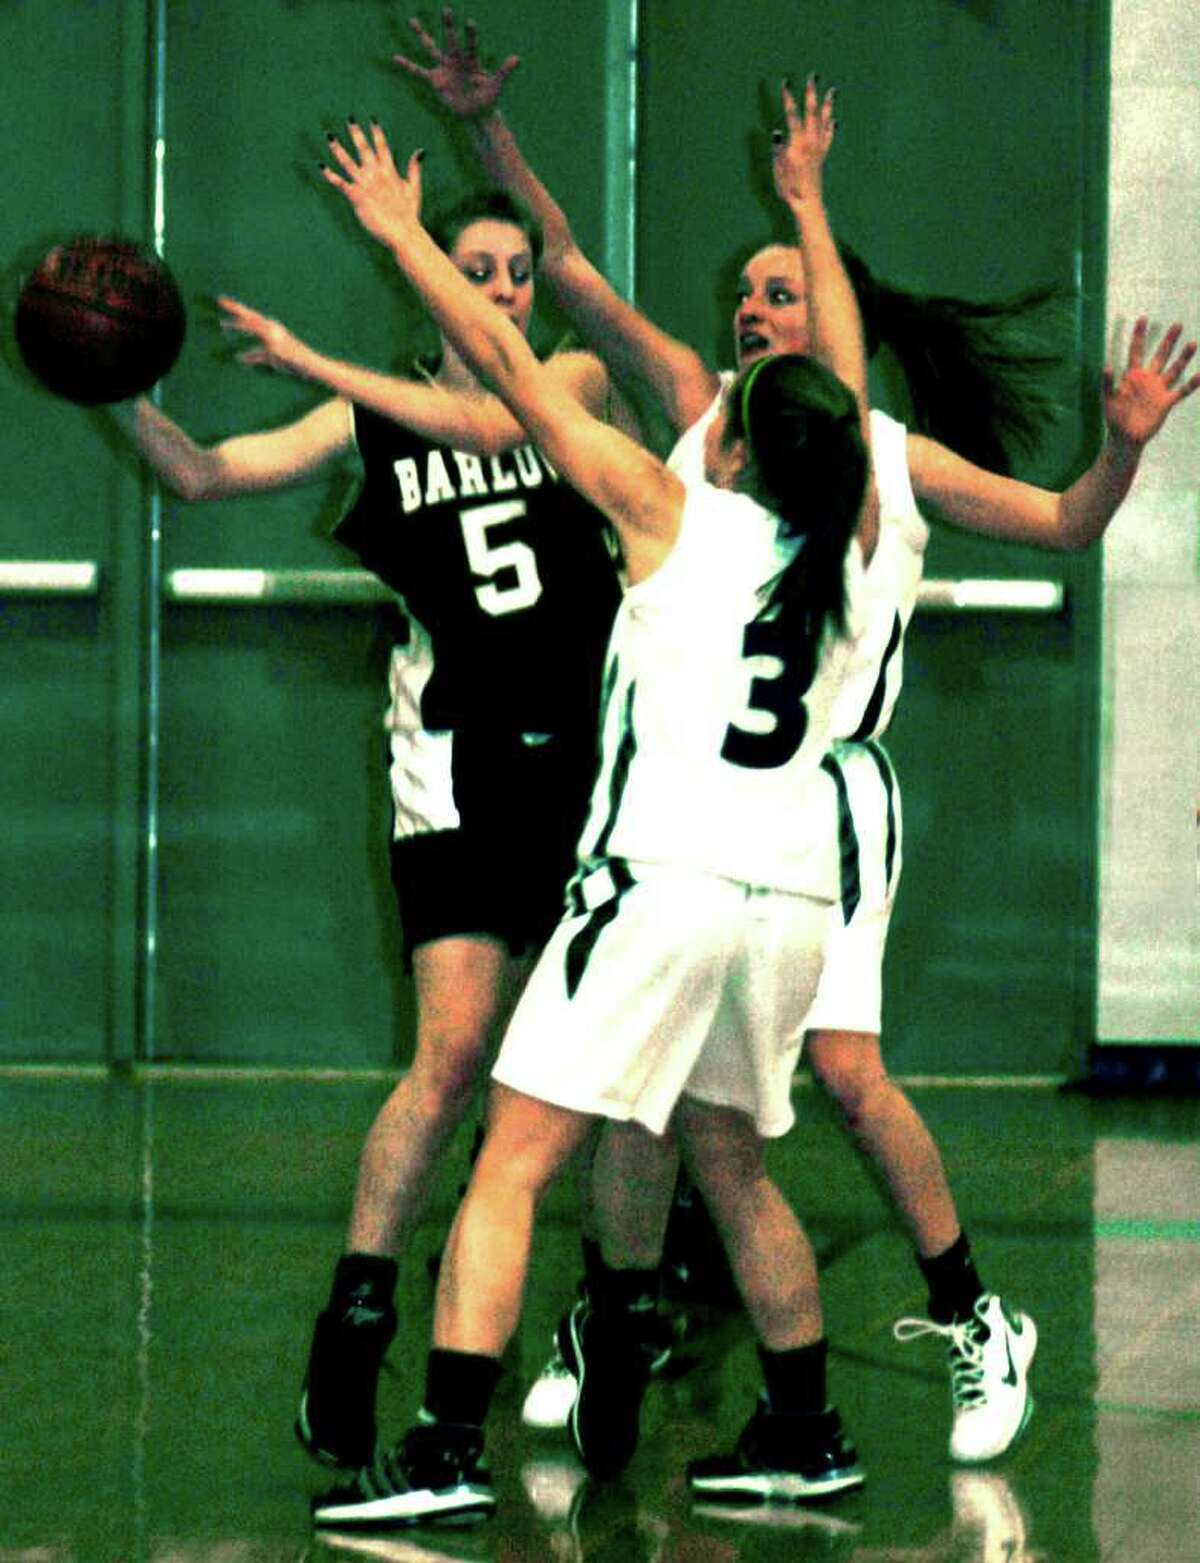 SPECTRUM/#3 Kelsey Heaton and #14 Jessica Noteware play defense for New Milford High School girls' basketball vs. Joel Barlow, Feb. 11, 2011 at NMHS.